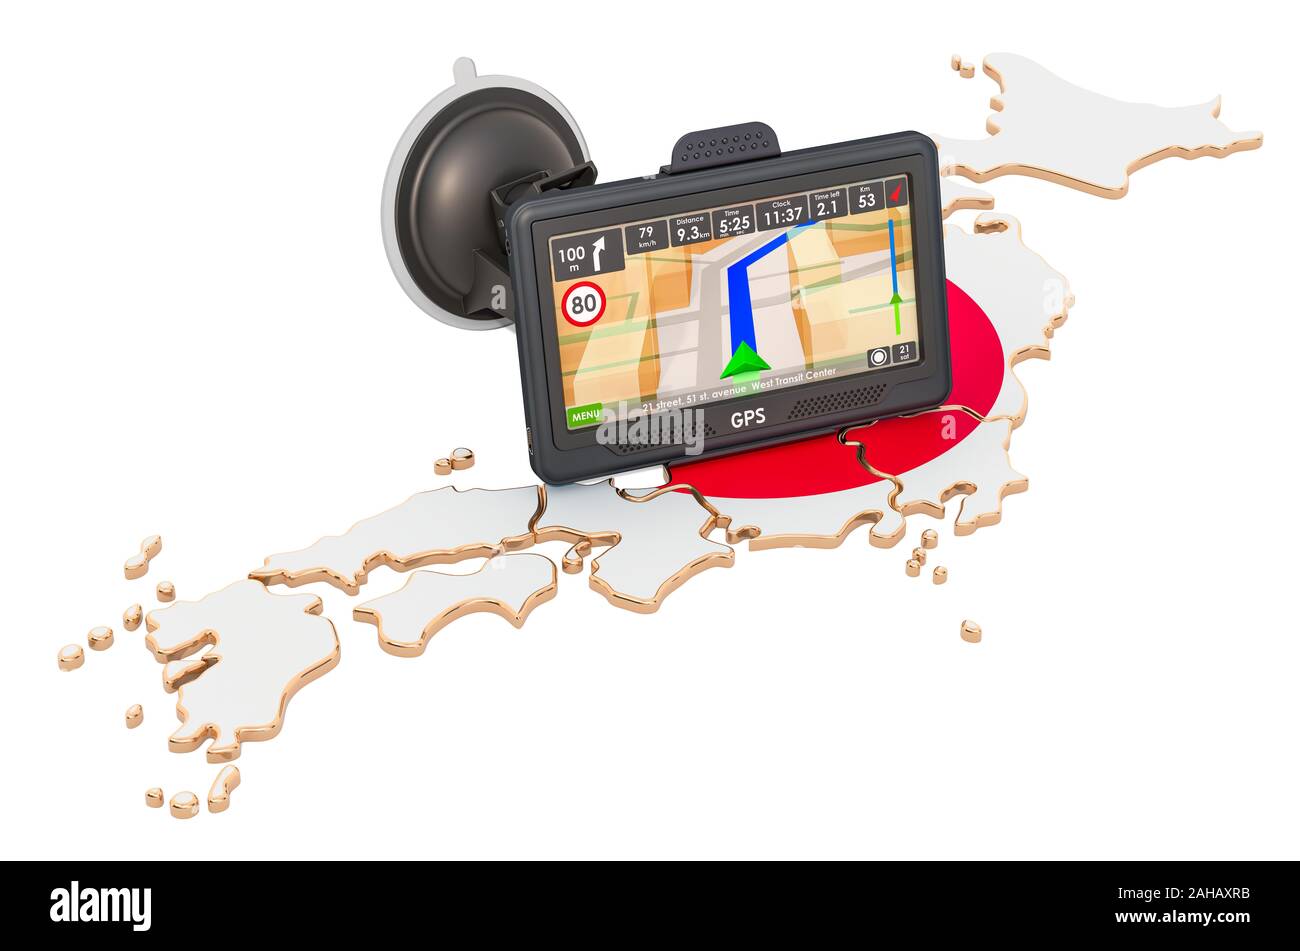 GPS navigation in Japan, 3D rendering isolated on white background Stock Photo